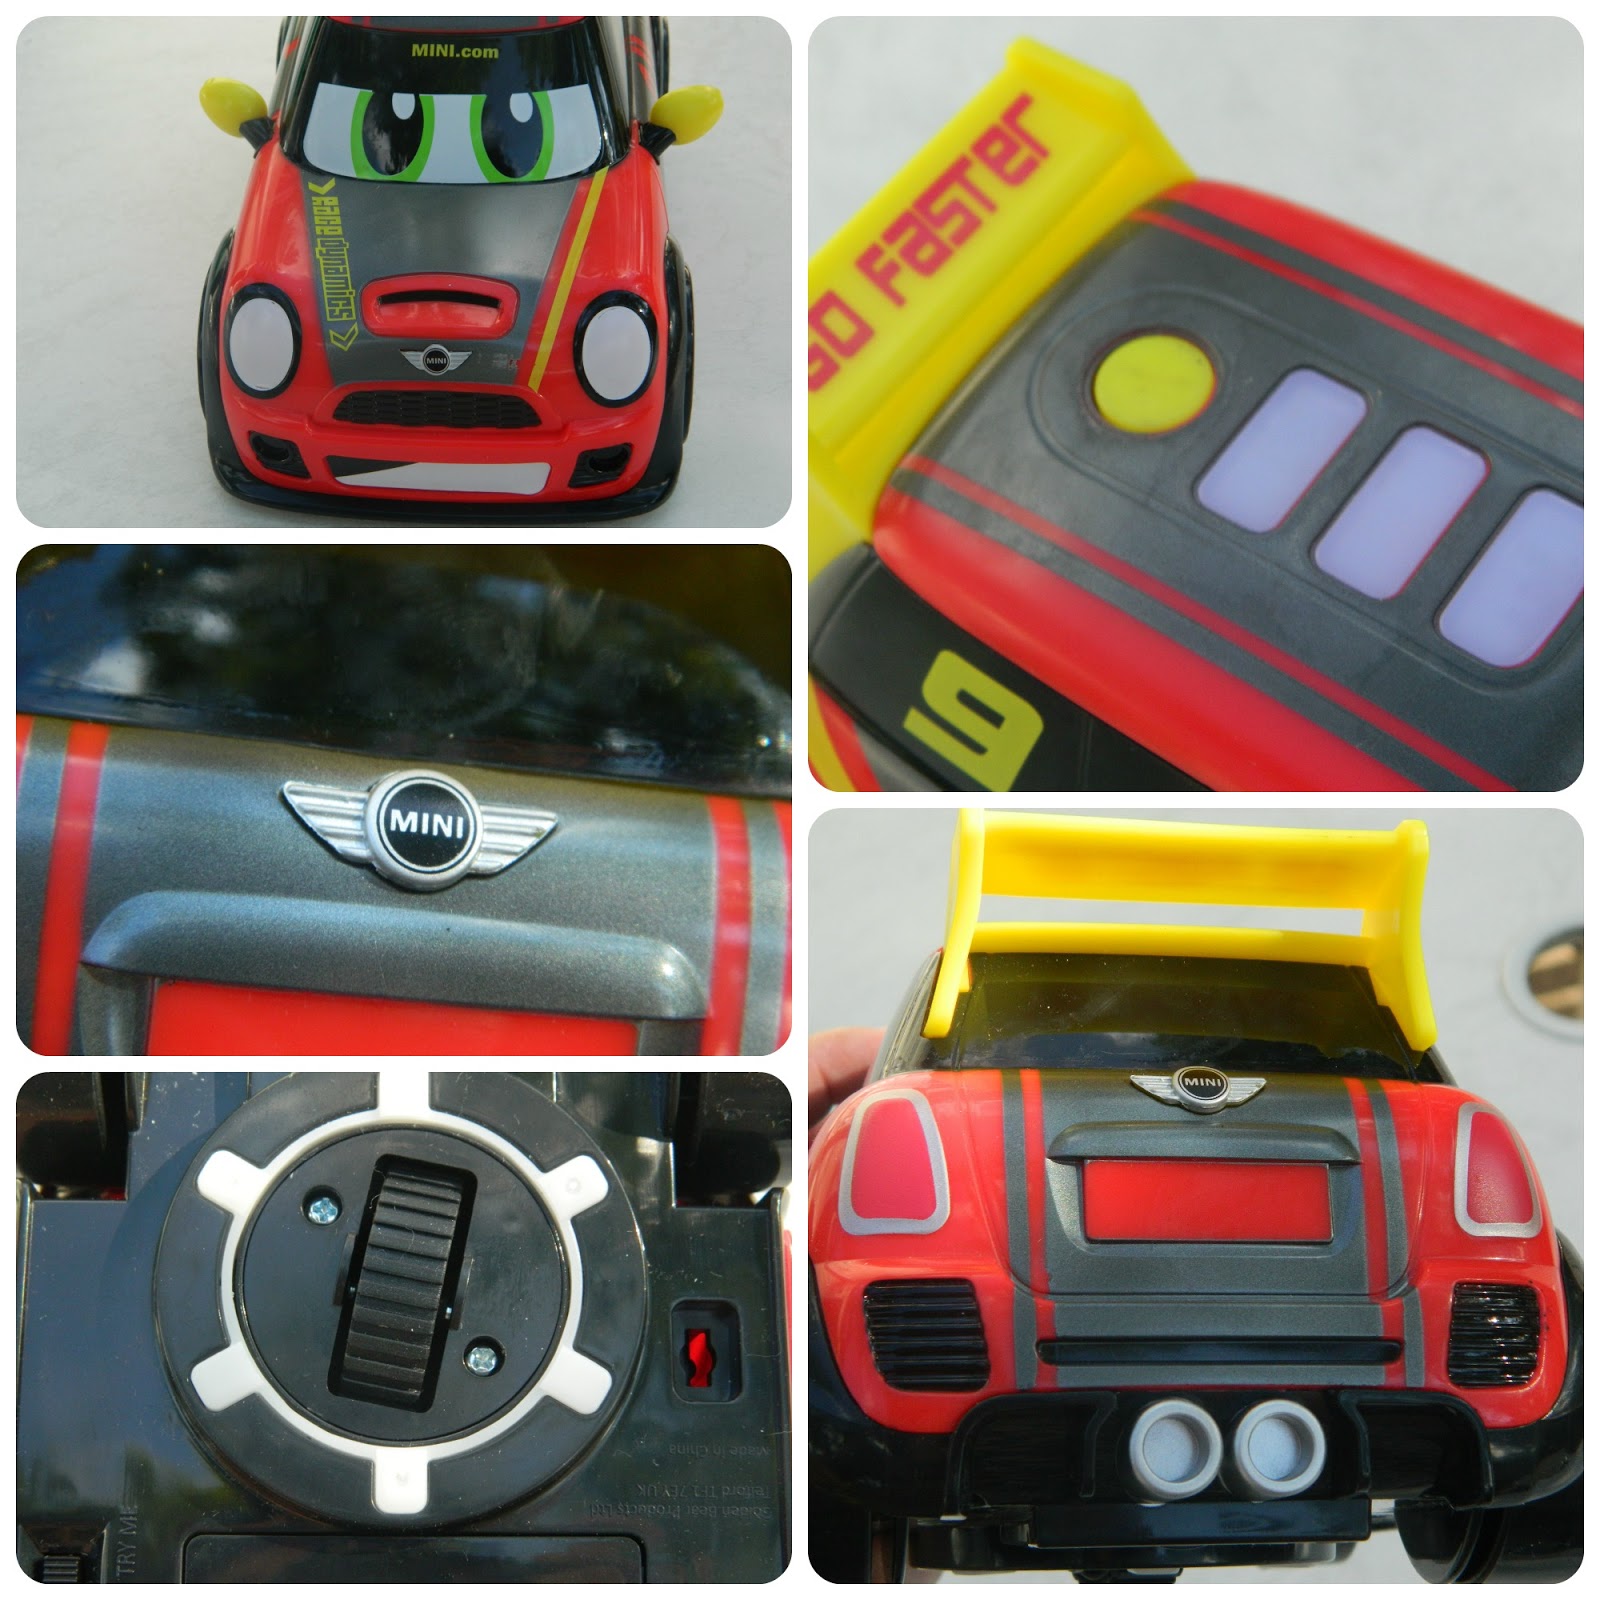 Go Mini Power Boost Car from Golden Bear Toys Red